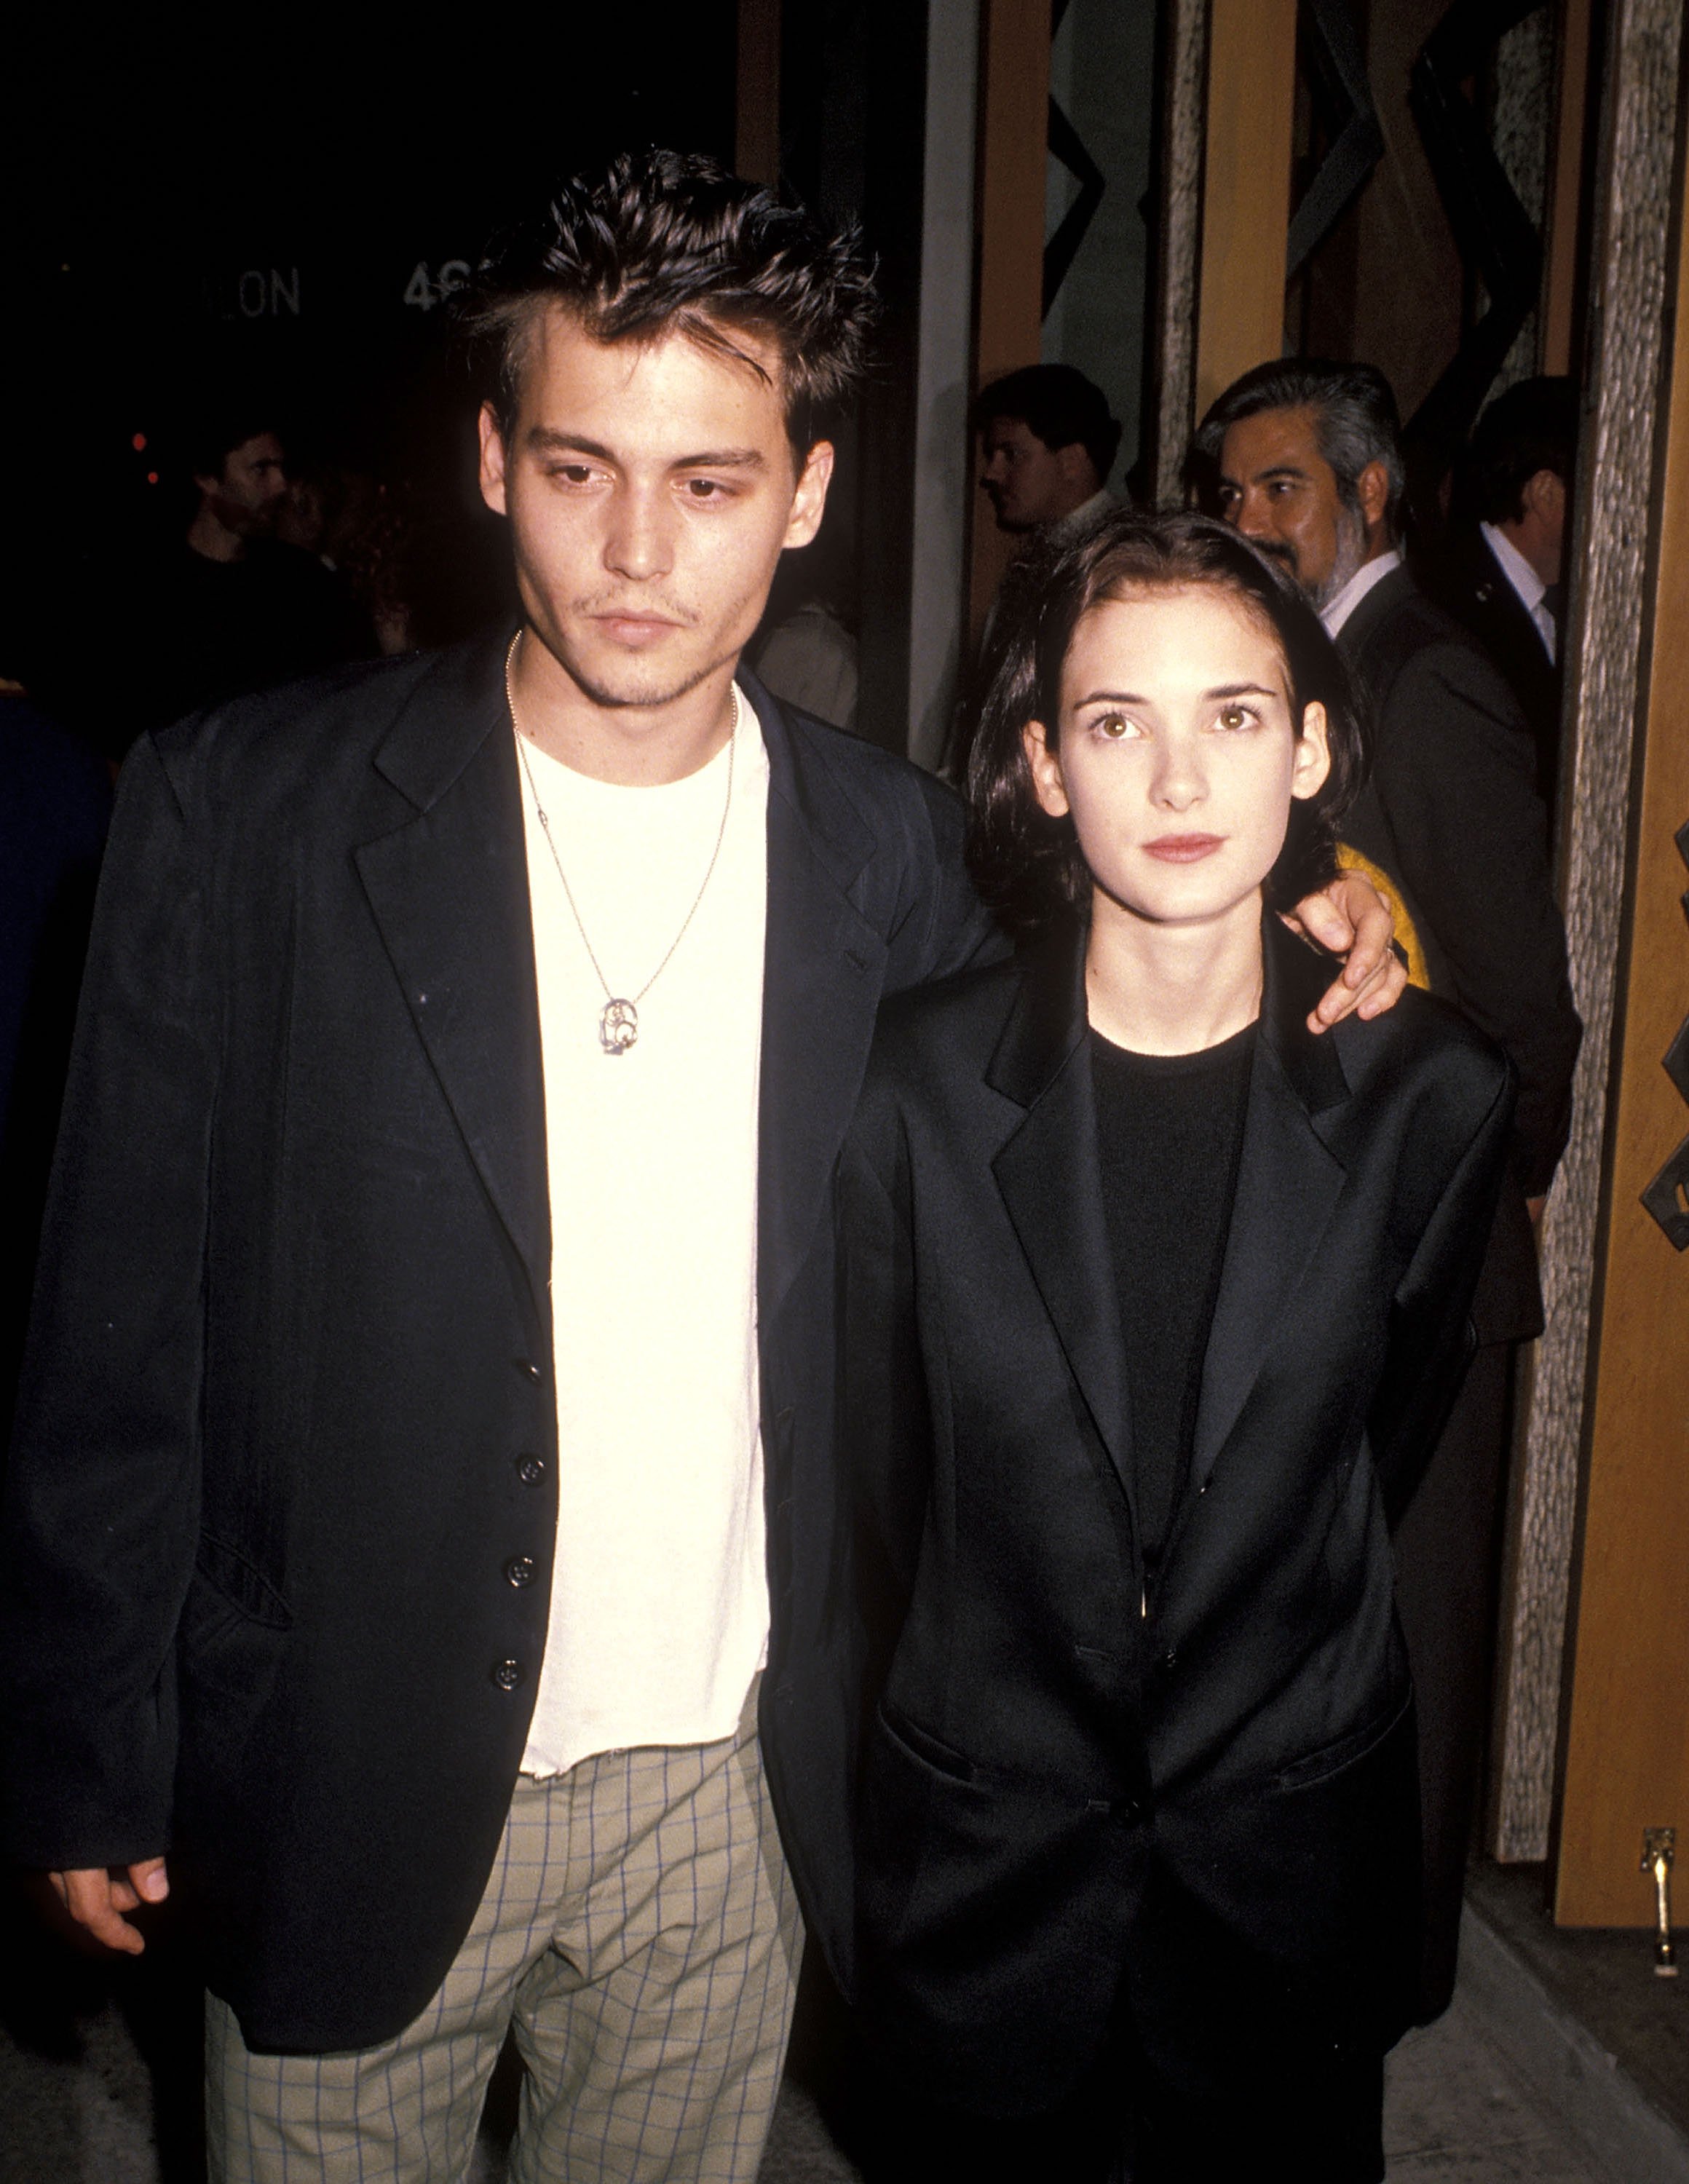 Johnny Depp and Winona Ryder at the "Pacific Heights" premiere on September 24, 1990, in Westwood, California. | Source: Ron Galella, Ltd./Ron Galella Collection/Getty Images